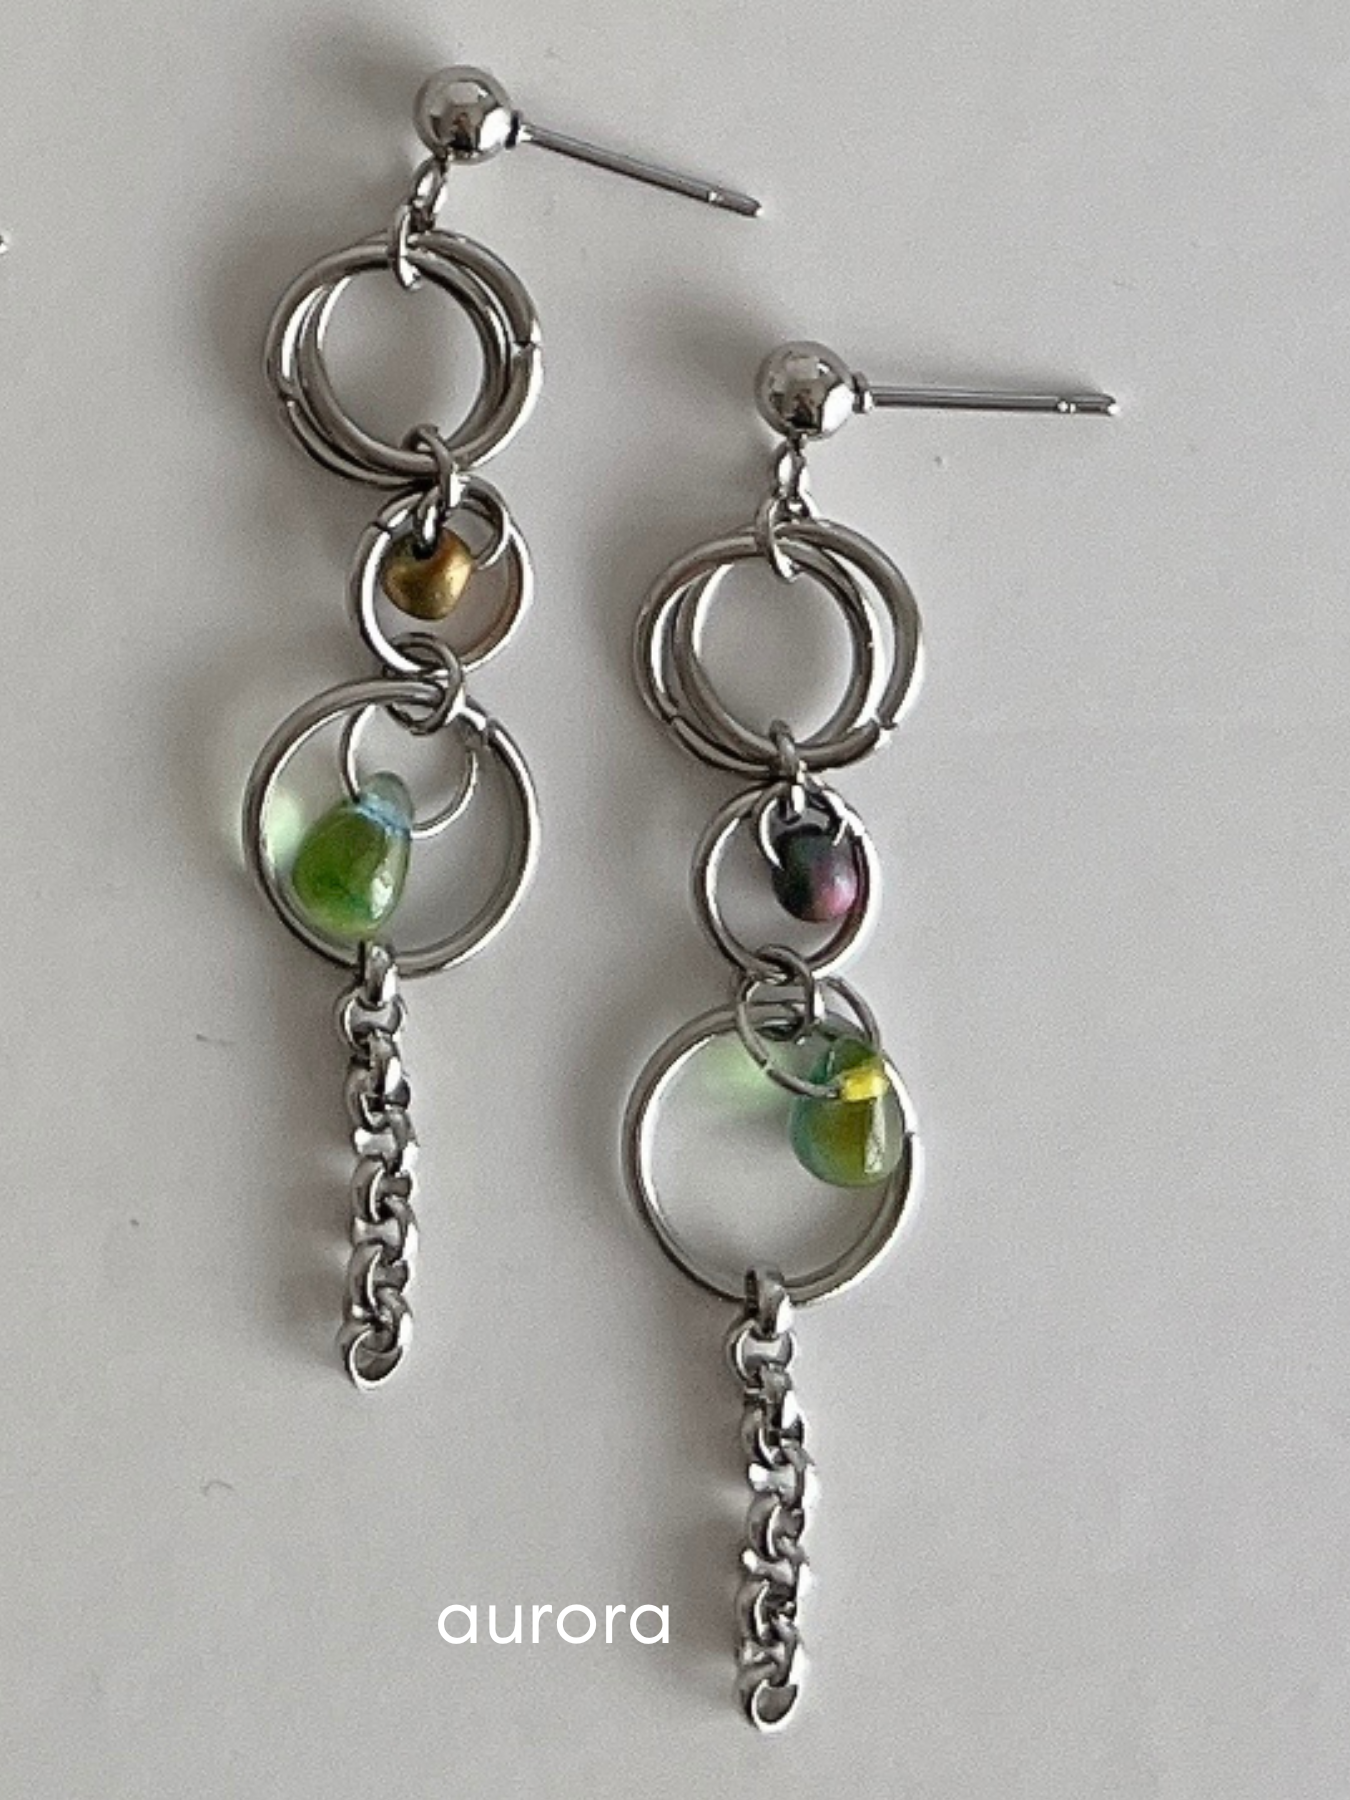 Water Droplets & Fairy Wand Chainmail Earrings